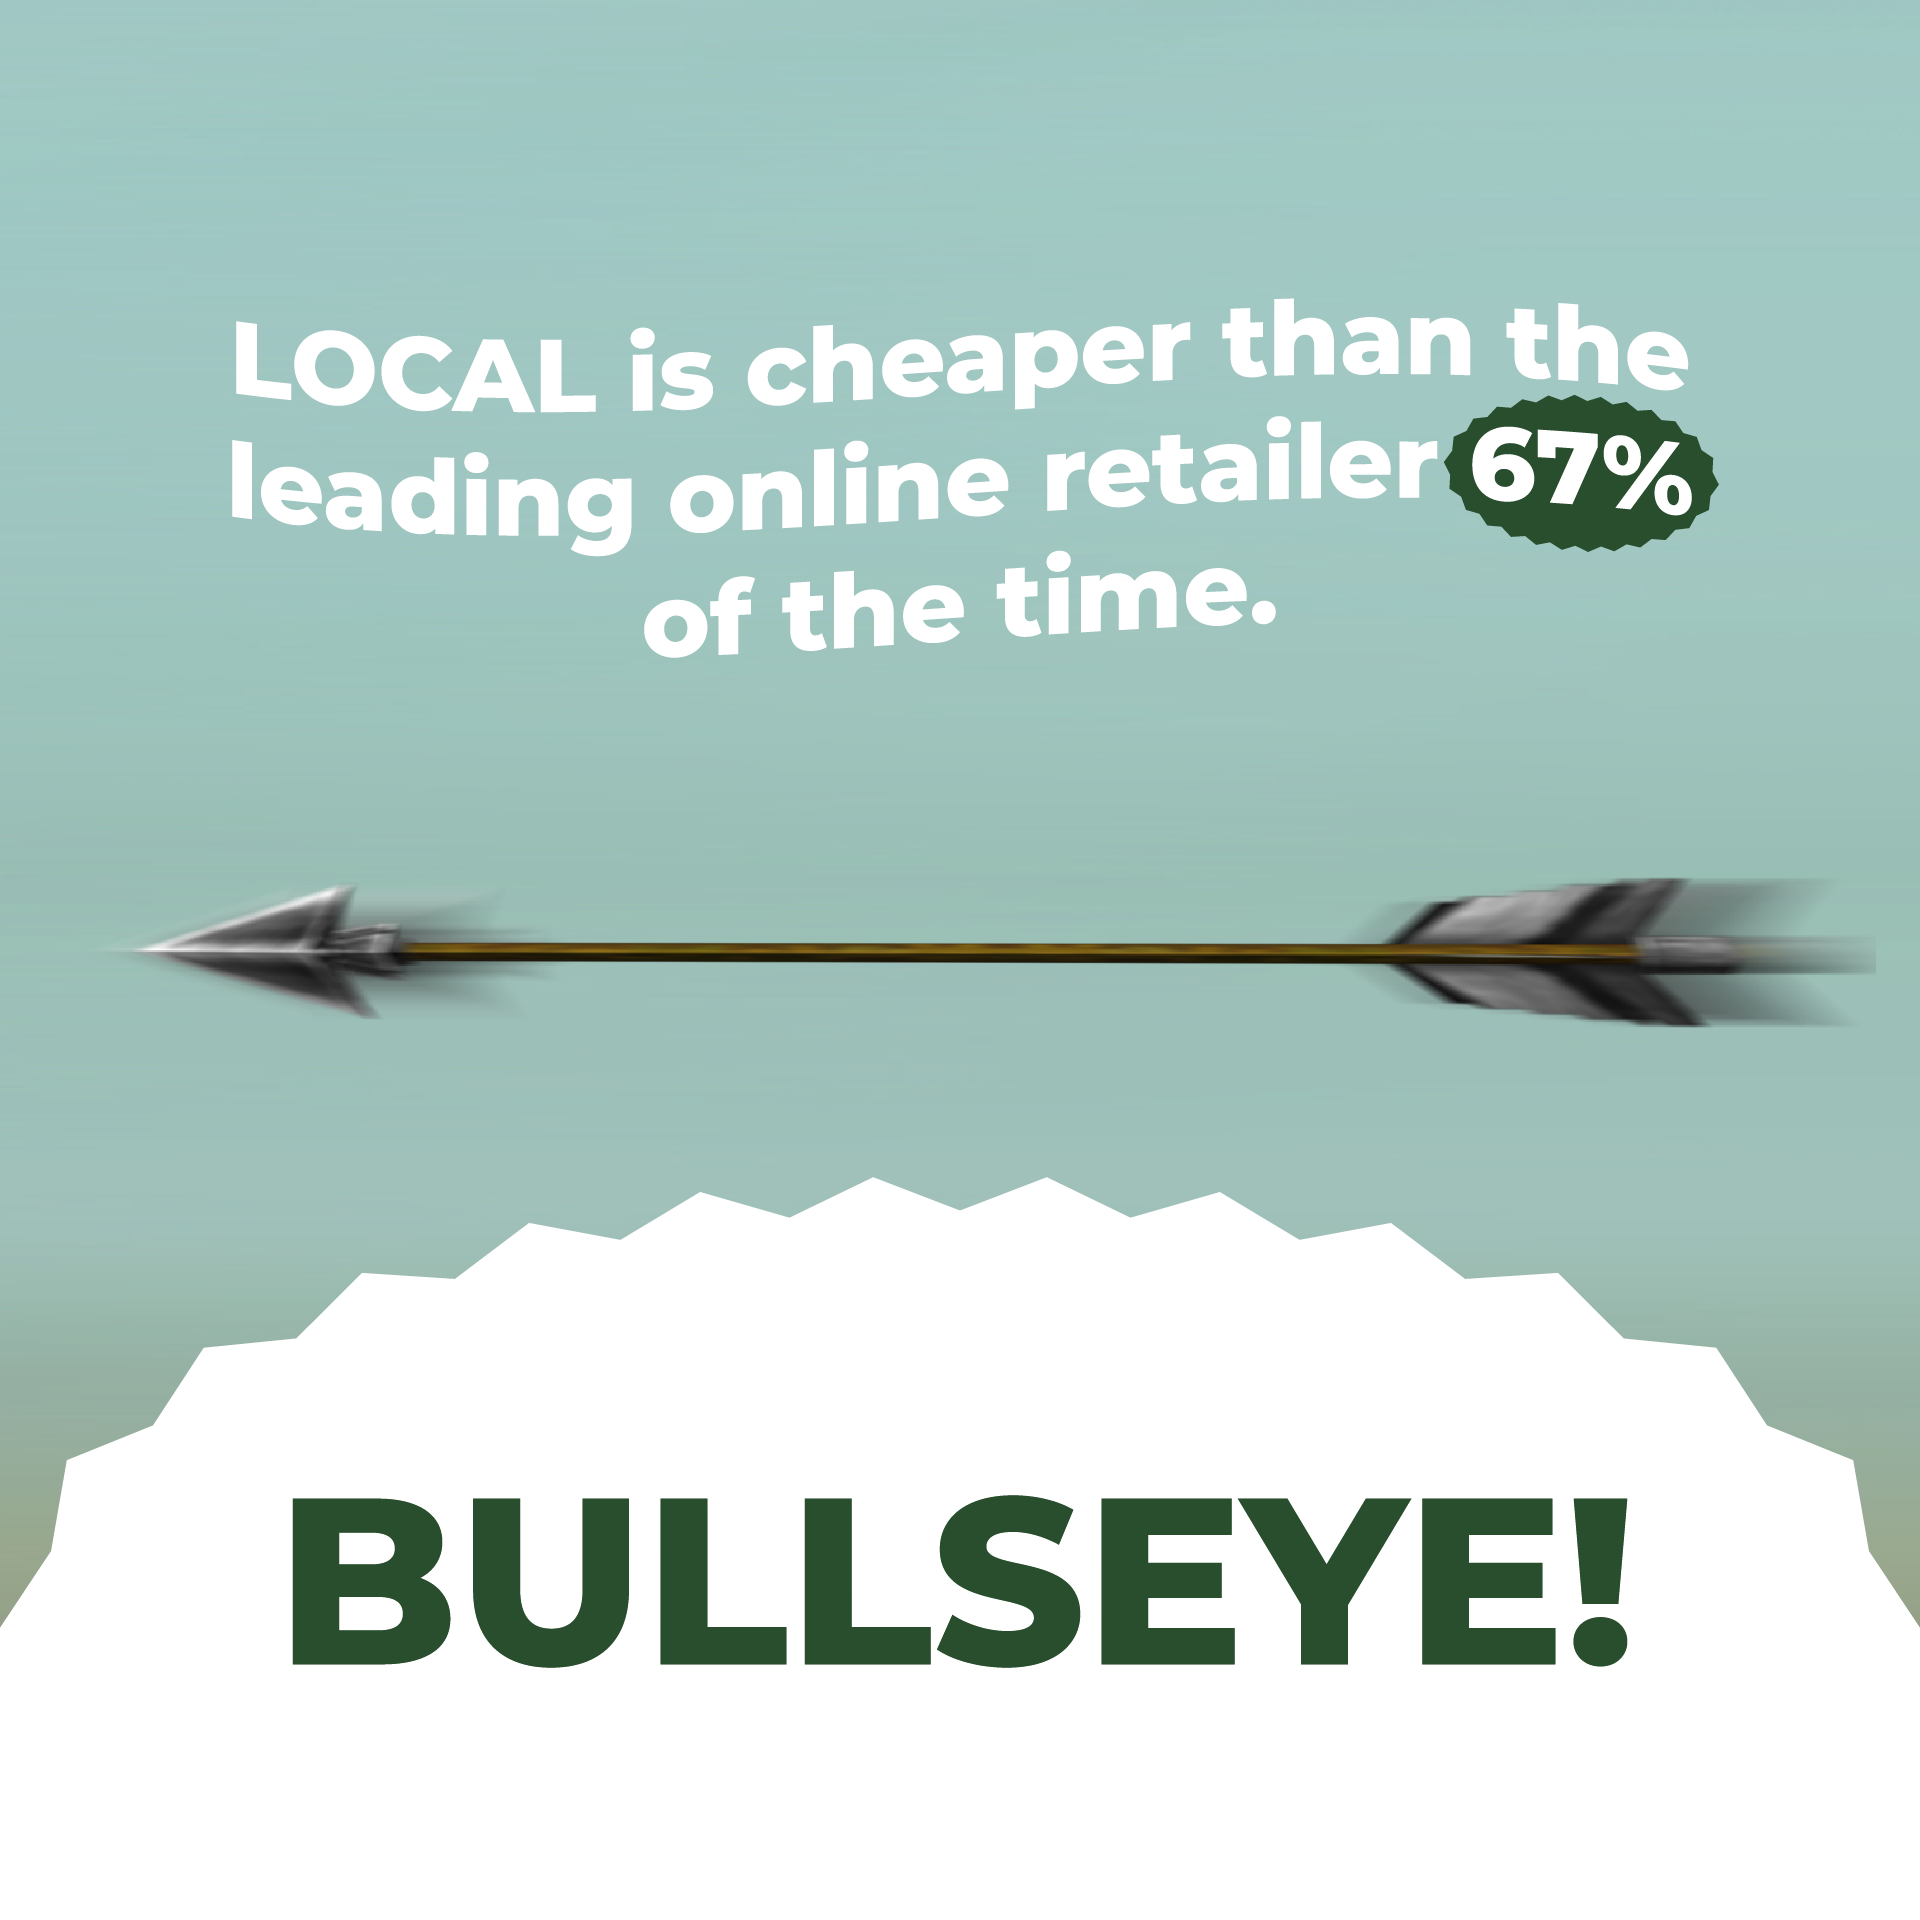 Local is cheaper than the leading online retailer 67% of the time.